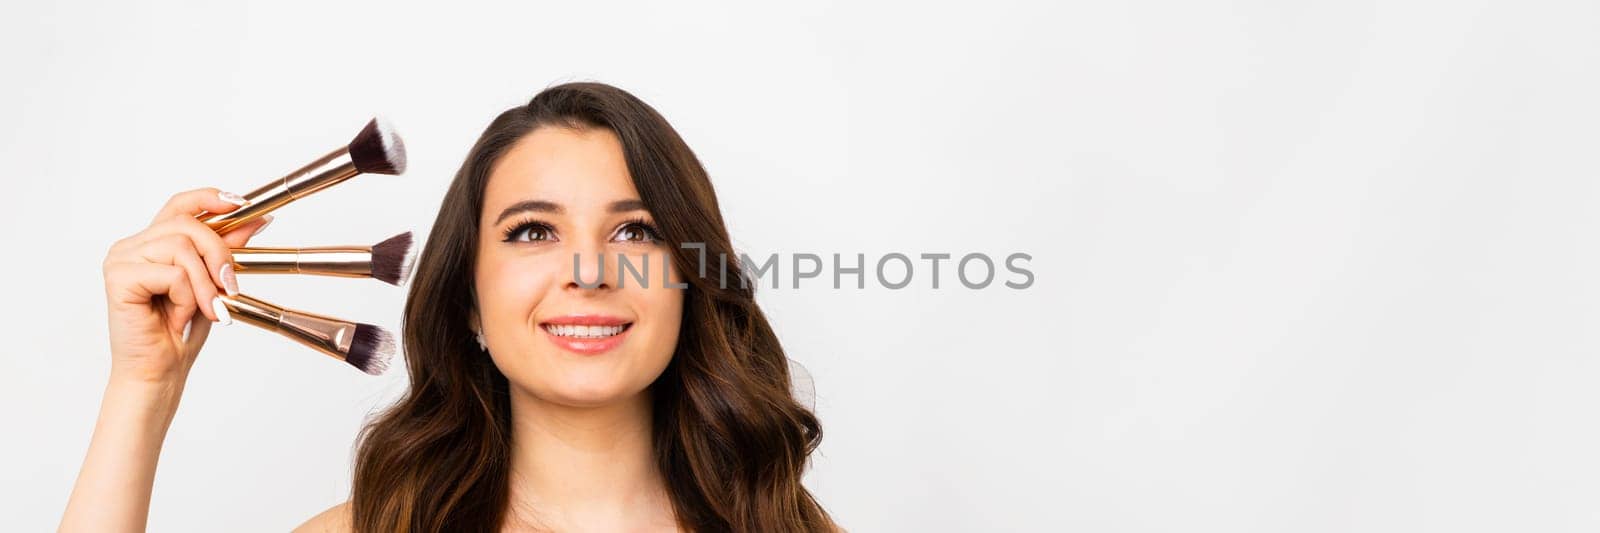 Charming woman holding golden makeup brushes and smiling.